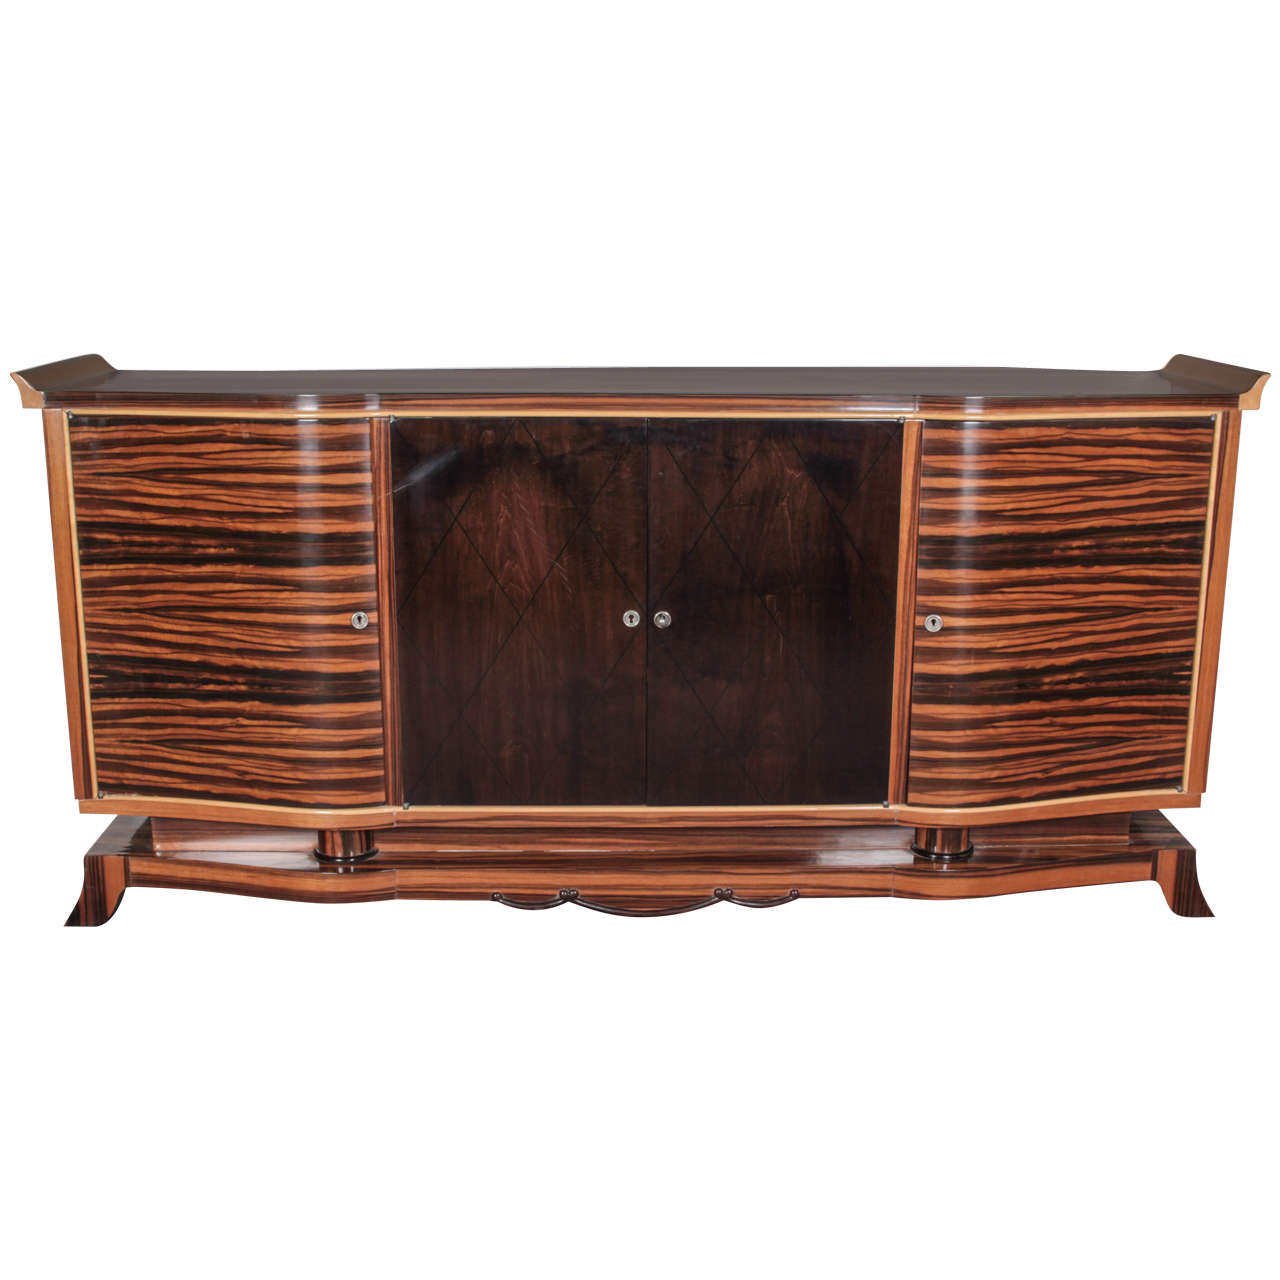 French Art Deco Macassar Ebony Cabinet Attributed to A. Guenot